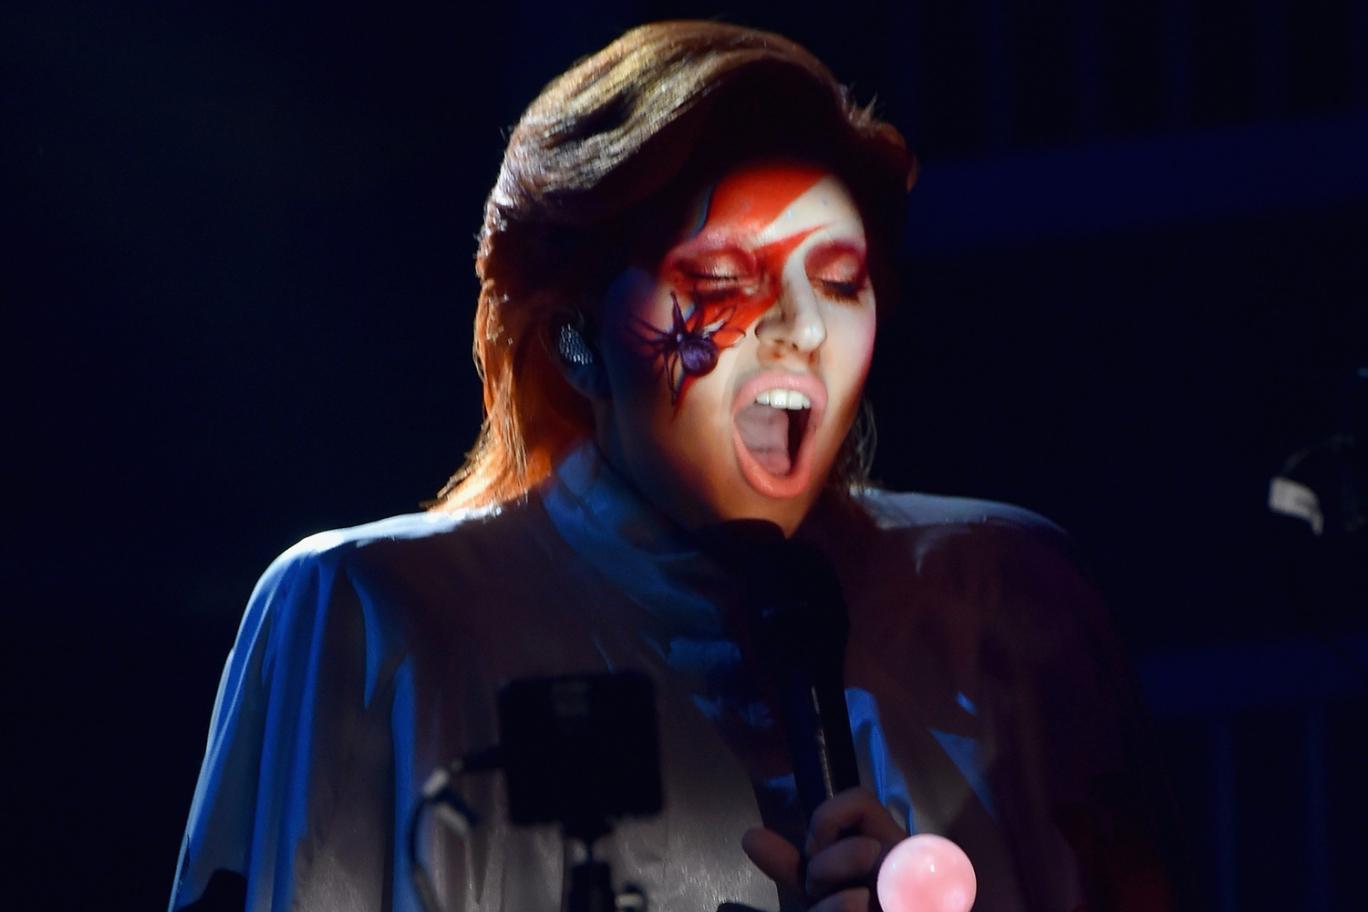 Lady Gaga performs a tribute to David Bowie at the Grammys